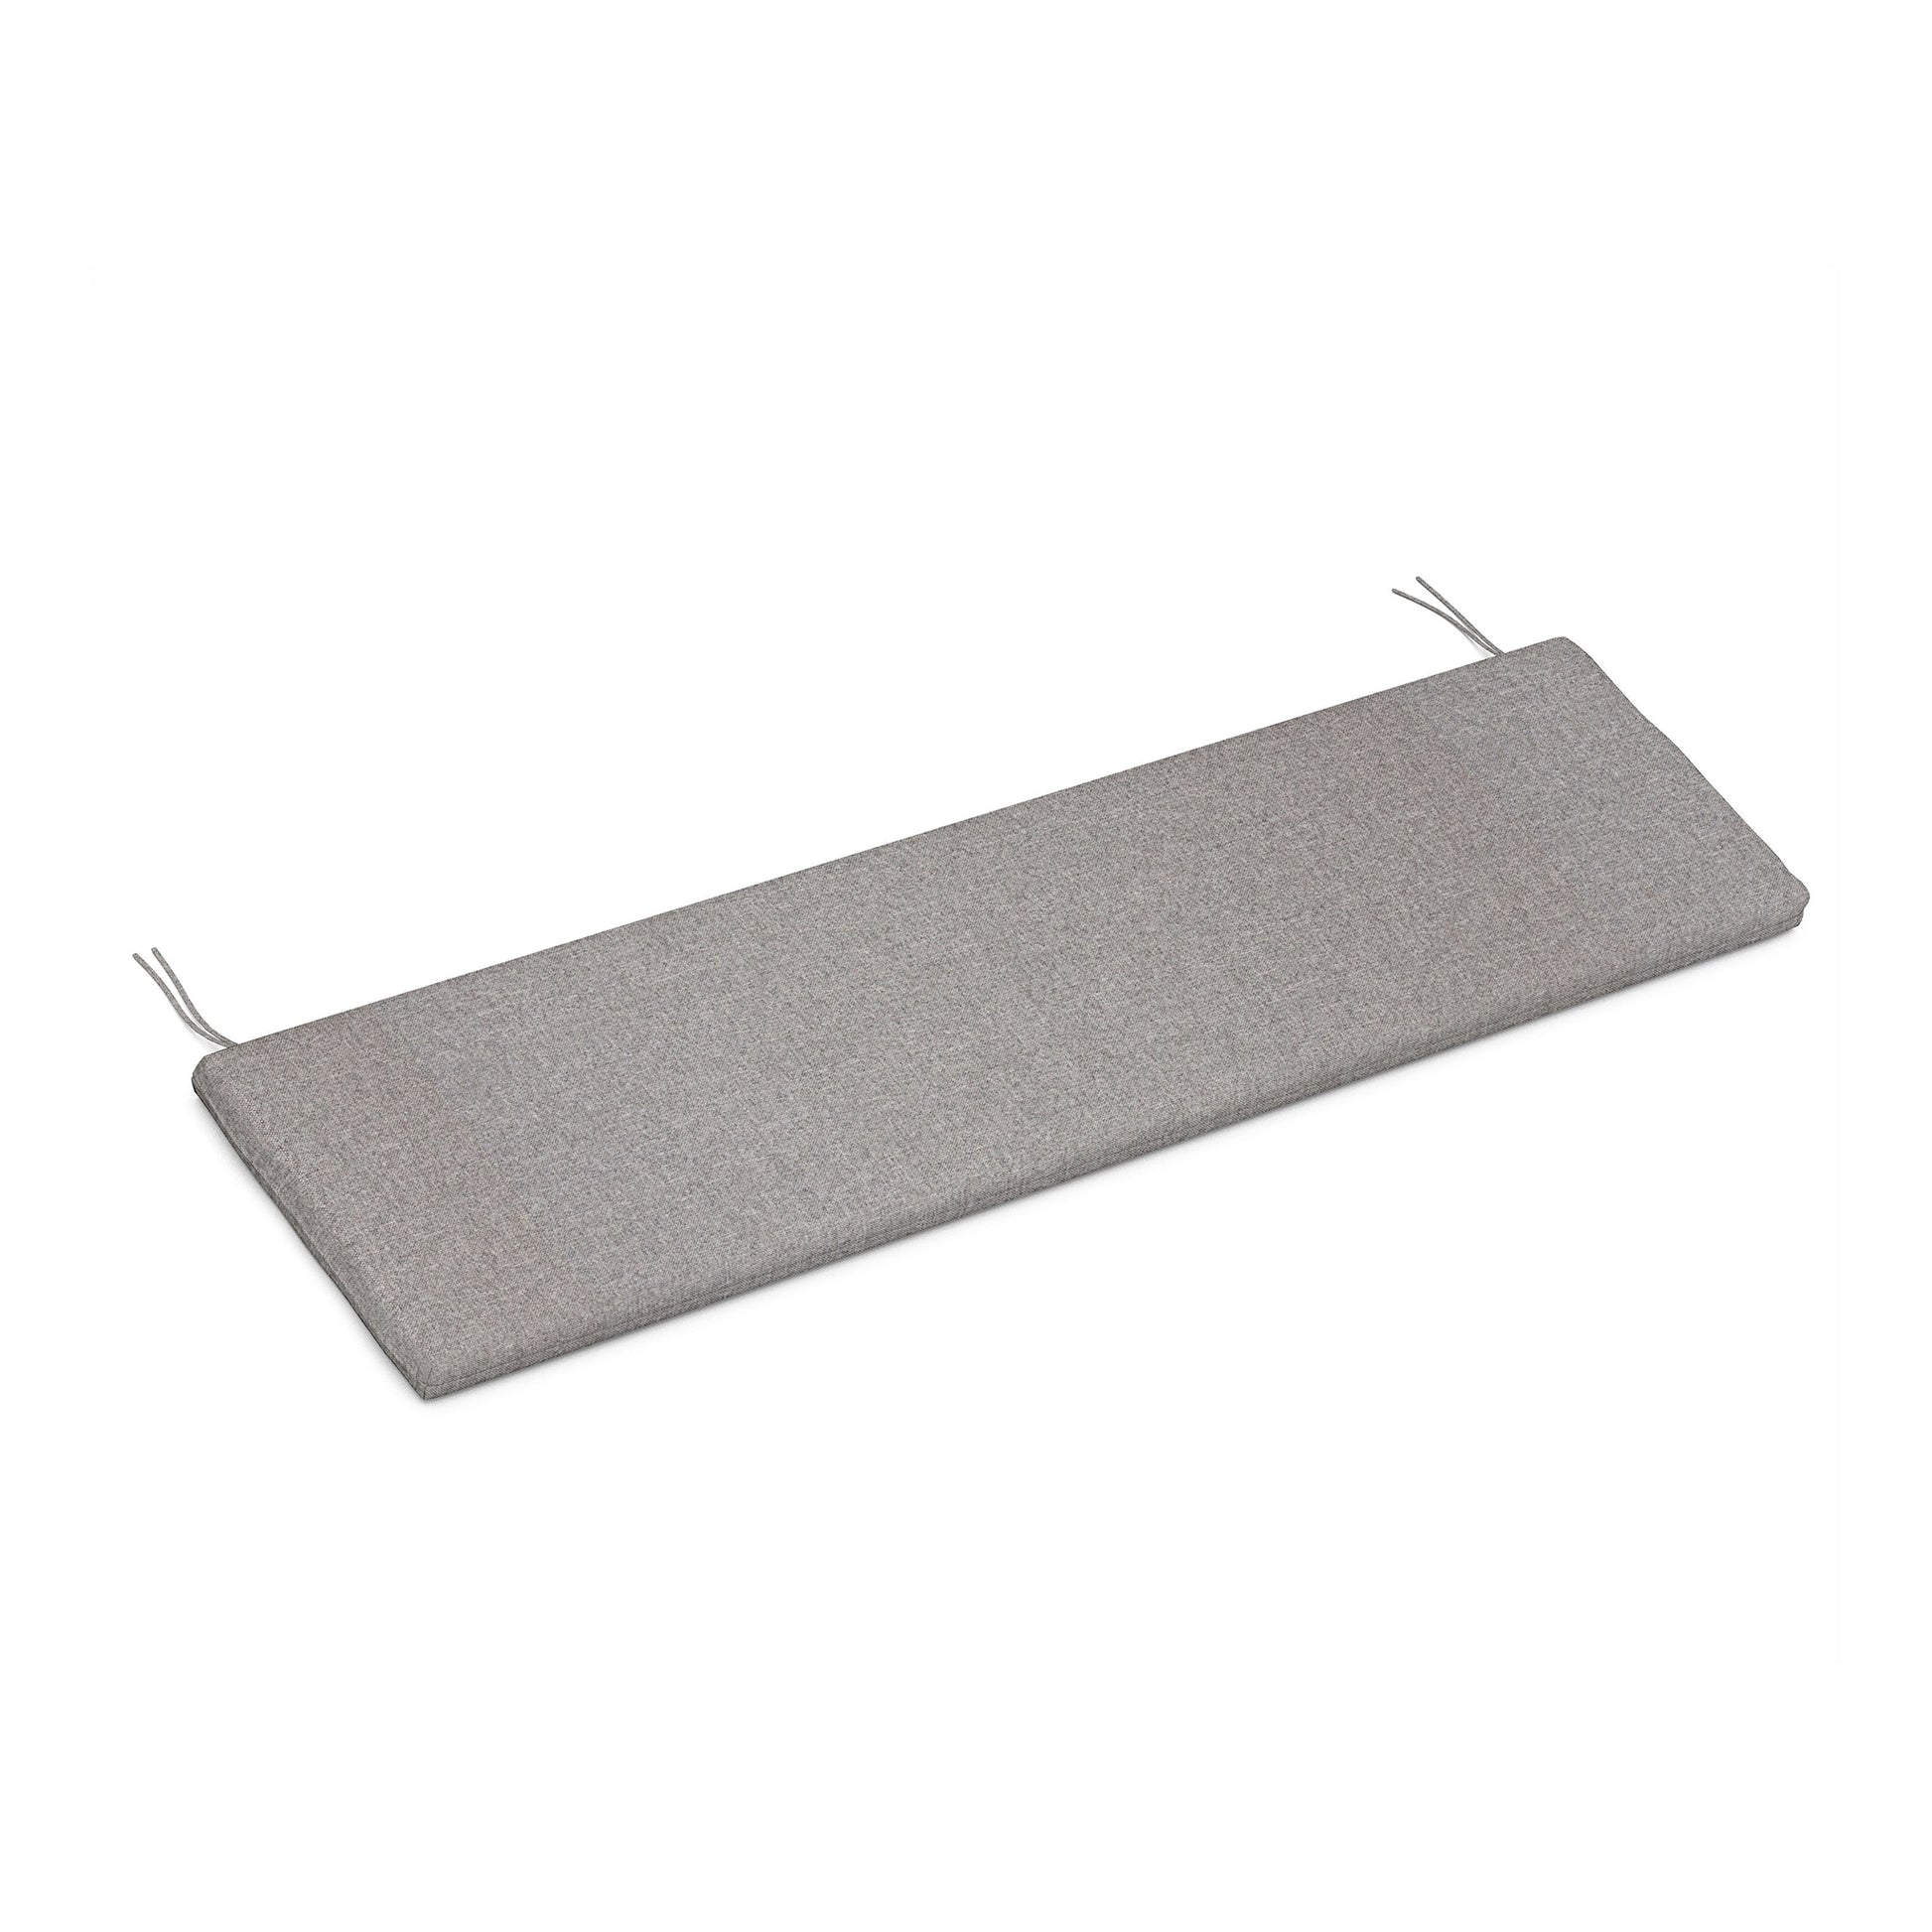 Gray POLYWOOD® XPWS0061 seat cushion with ties on a white background. The cushion is rectangular with a slightly textured fabric cover.